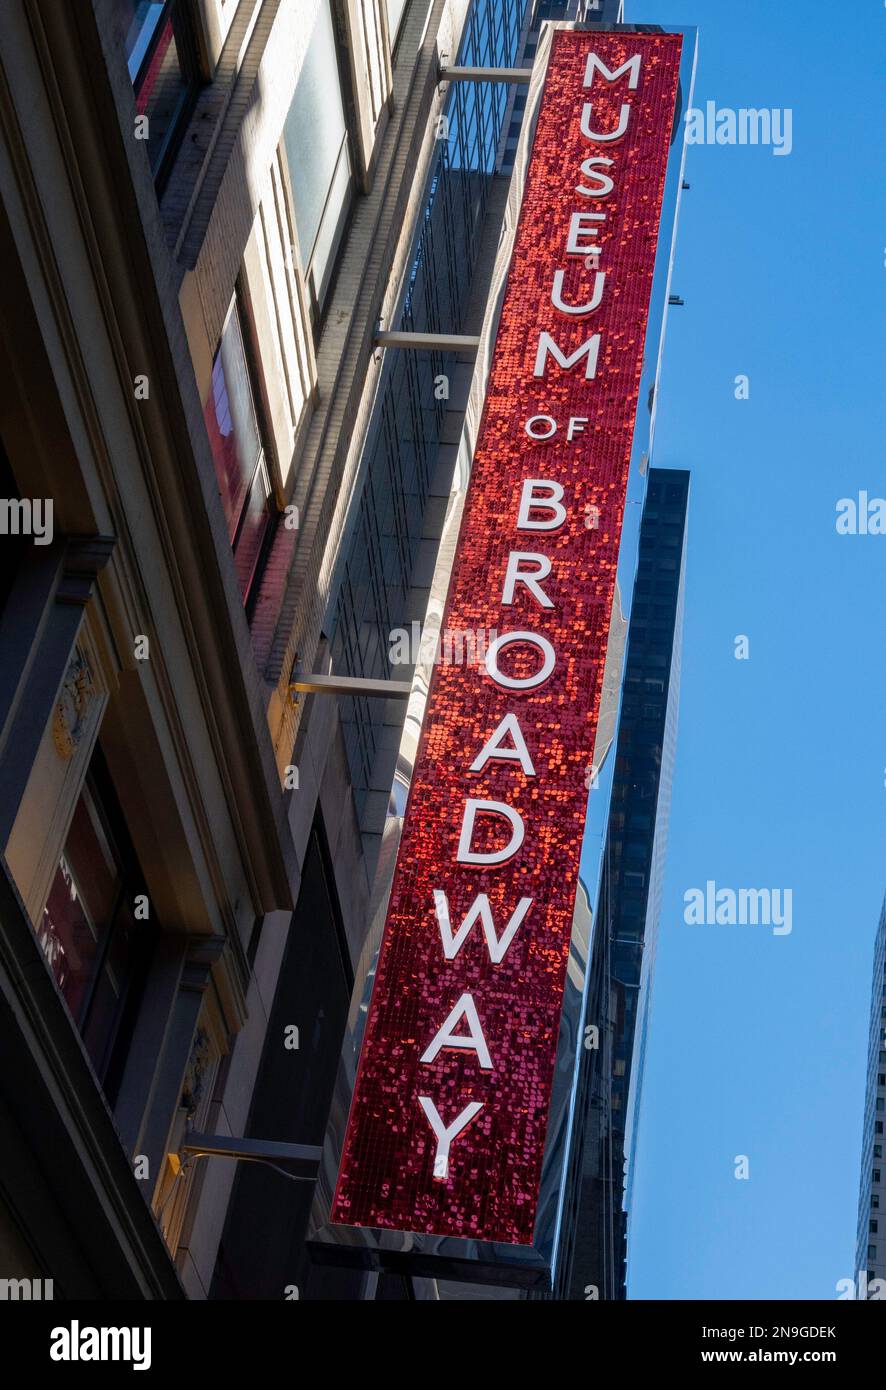 The Museum Of Broadway Is Located In The Theater District Near Times Square 2023 New York City United States 2N9GDEK 